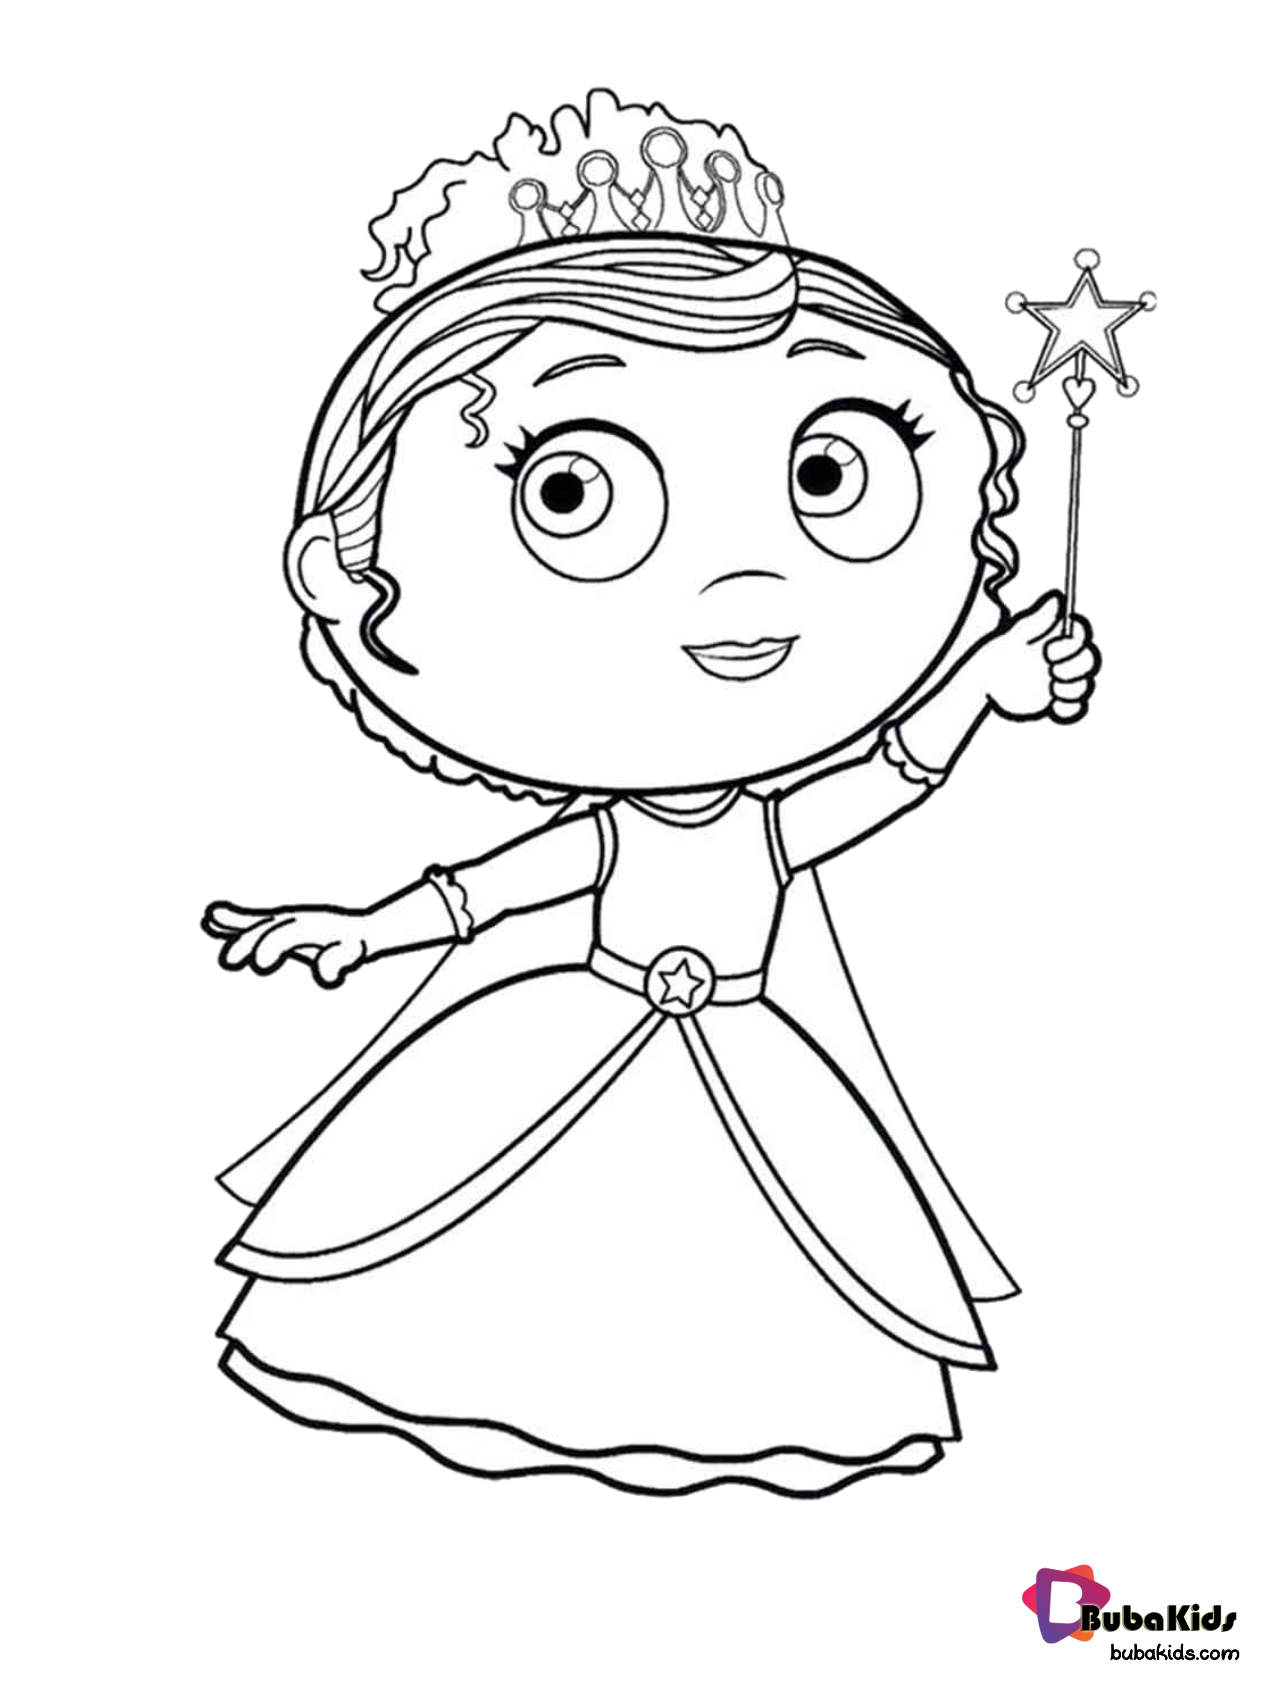 Super Why coloring page. Wallpaper